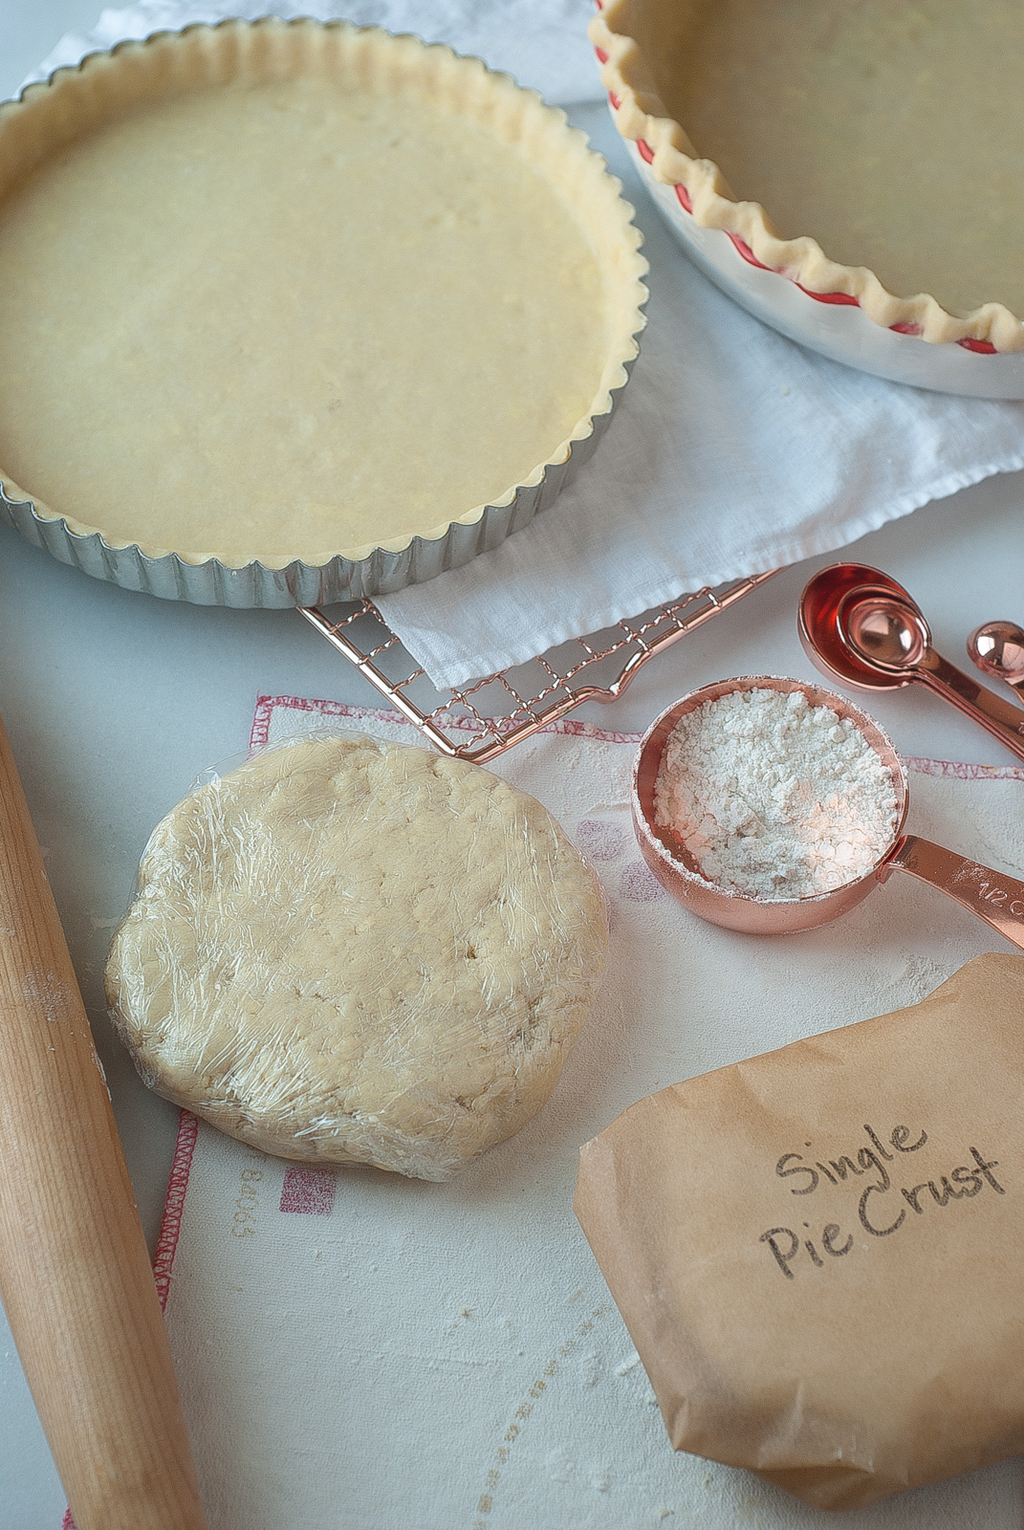 Melt in your mouth pie crust